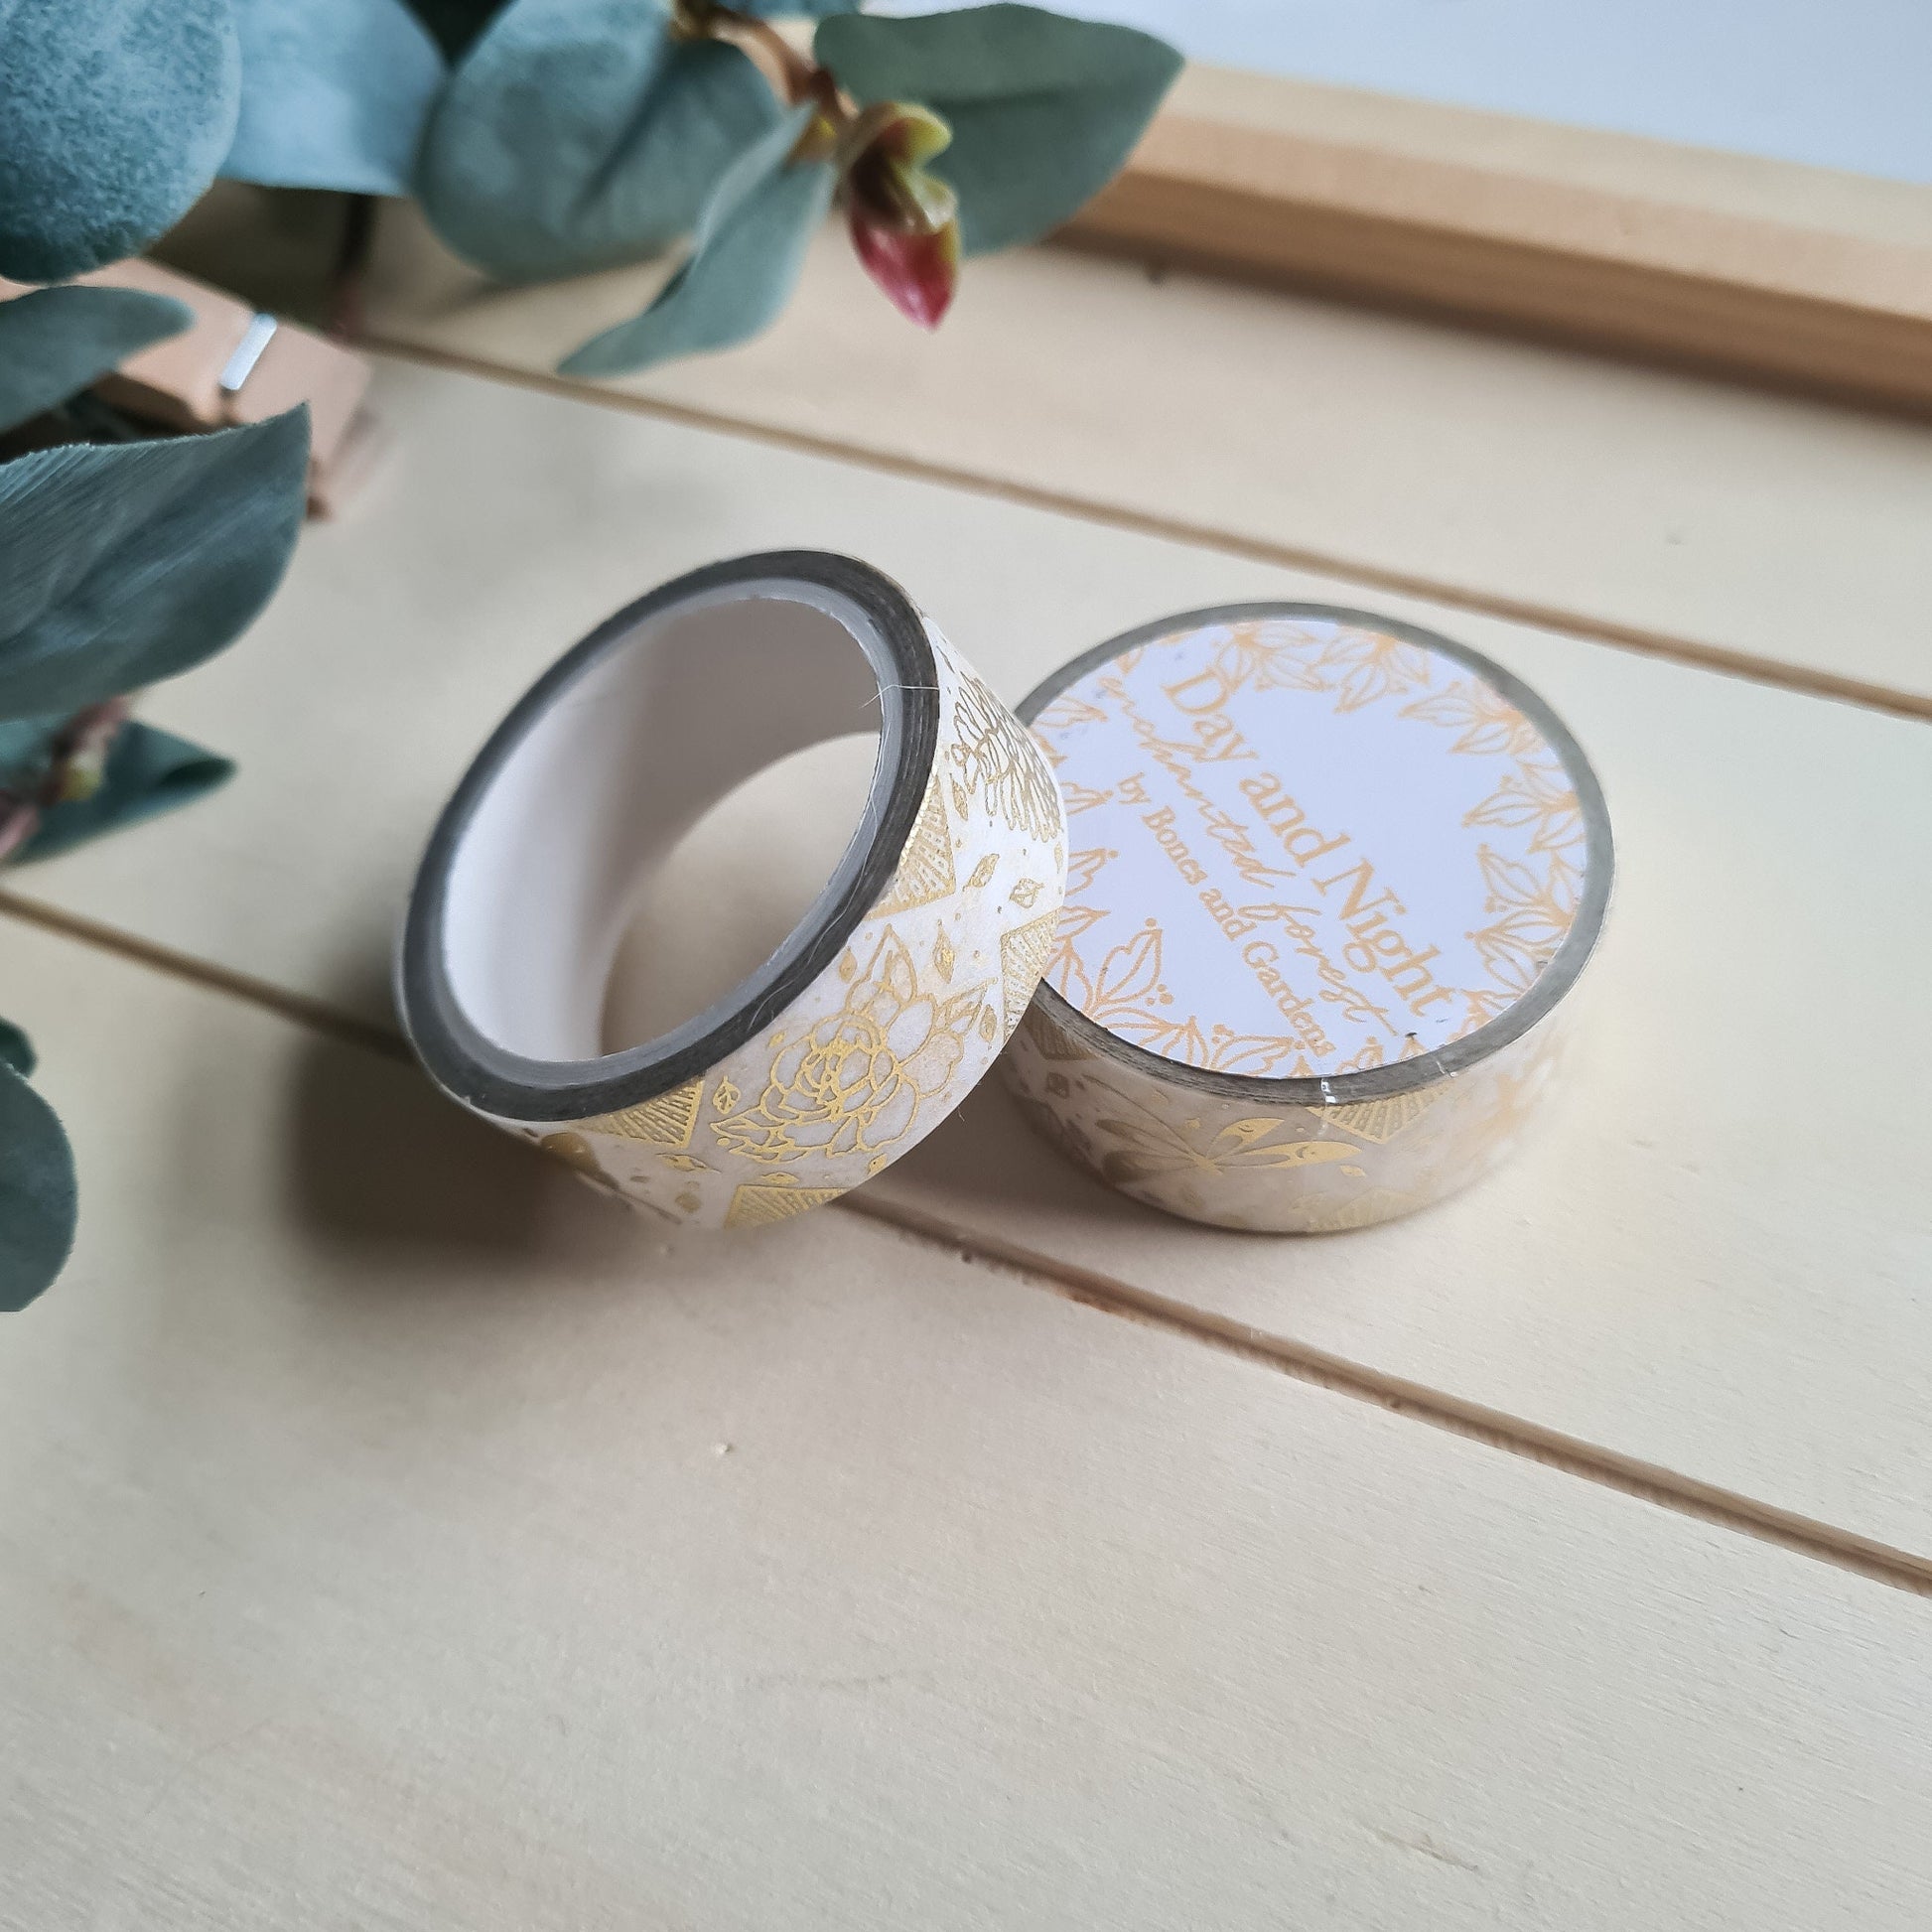 White and Gold Foil Scattered Dots Decorative Washi Tape 15mm x 10m 